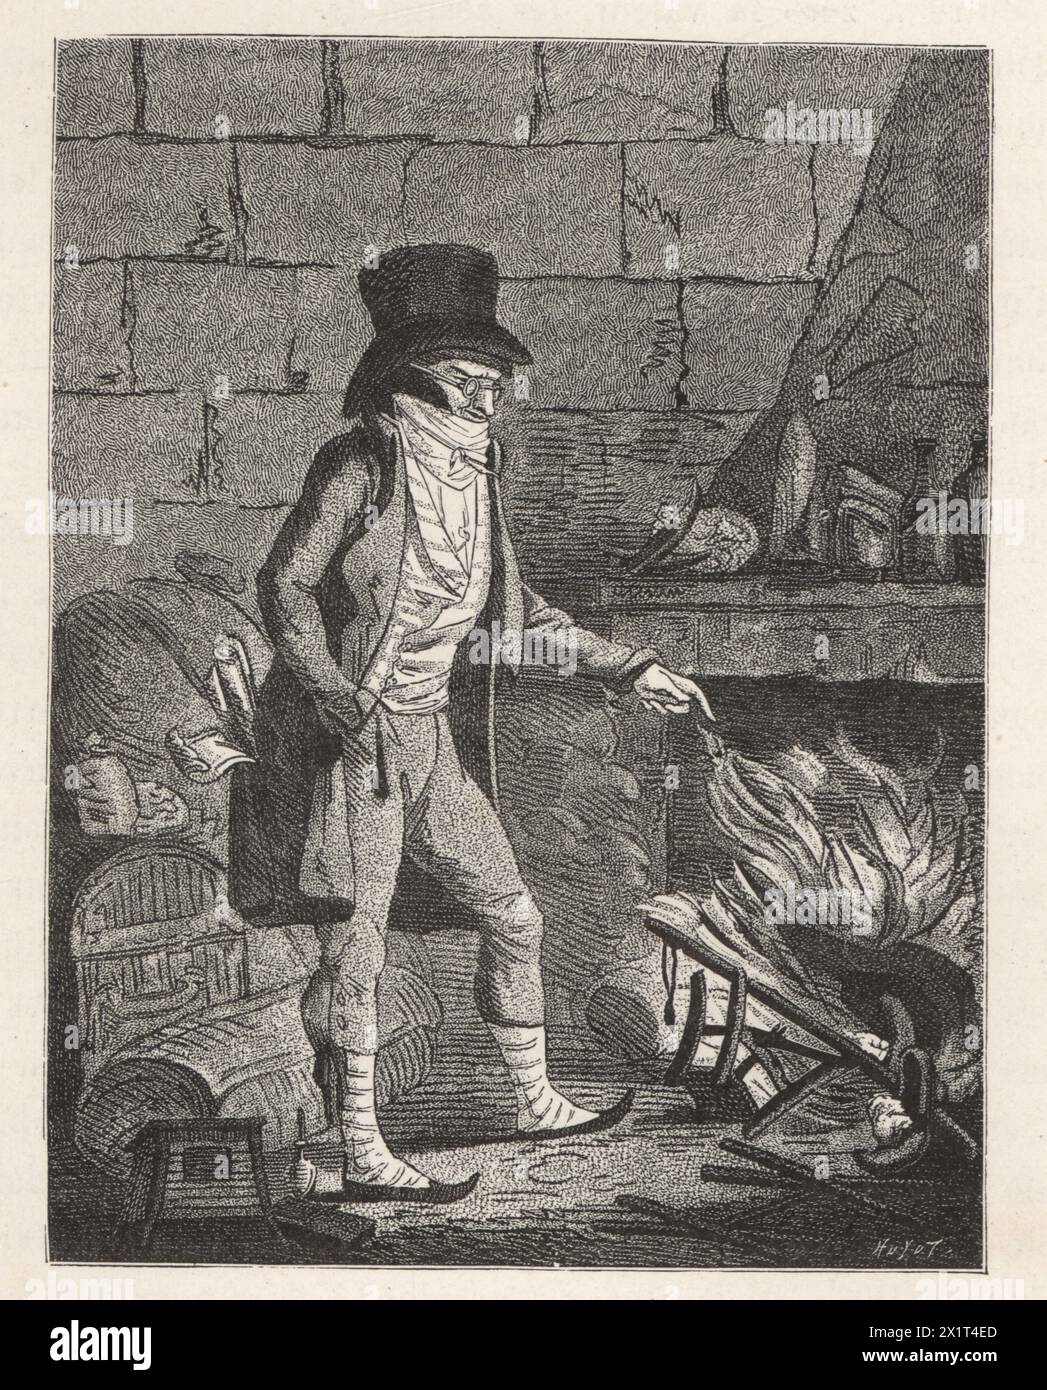 Speculator of rue Vivienne burning furniture in a fireplace, Paris, Napoleonic era. Anonymous caricature against stock dealers. Le parvenu de la rue Vivienne, caricature anonyme contre les agioteurs. Woodcut by Huyot from Paul Lacroix's Directoire, Consulat et Empire, (Directory, Consulate and Empire), Paris, 1884. Stock Photo